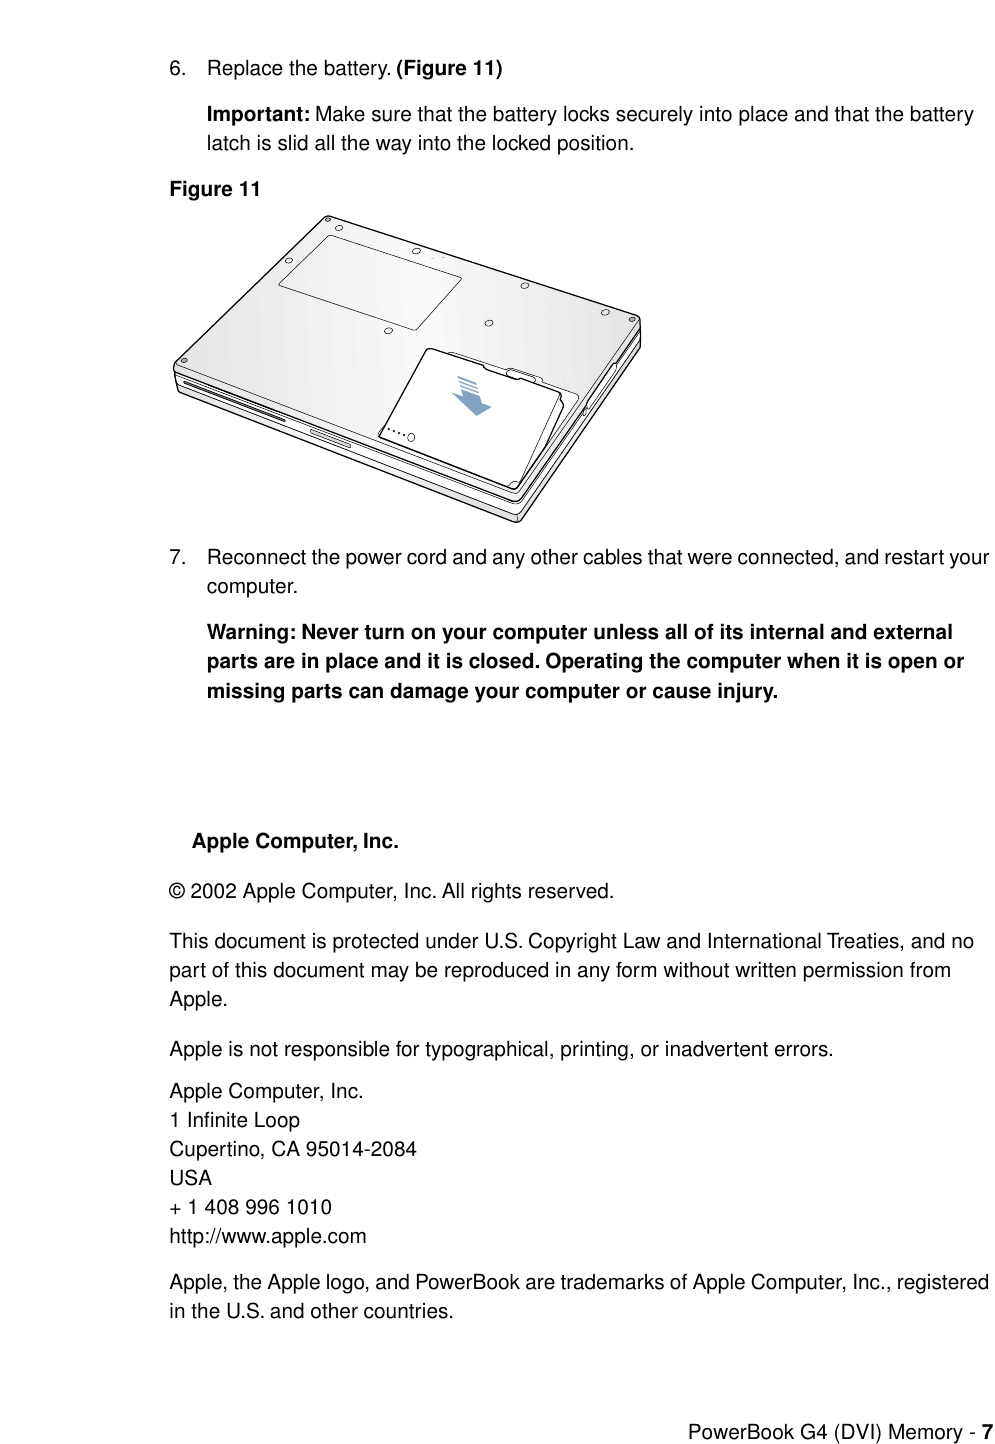 Page 7 of 7 - Apple PowerBook G4 (DVI) User Manual Power Book And (1GHz/867MHz) - Memory Card Replacement Instructions Pbg4dvi-mem-cip